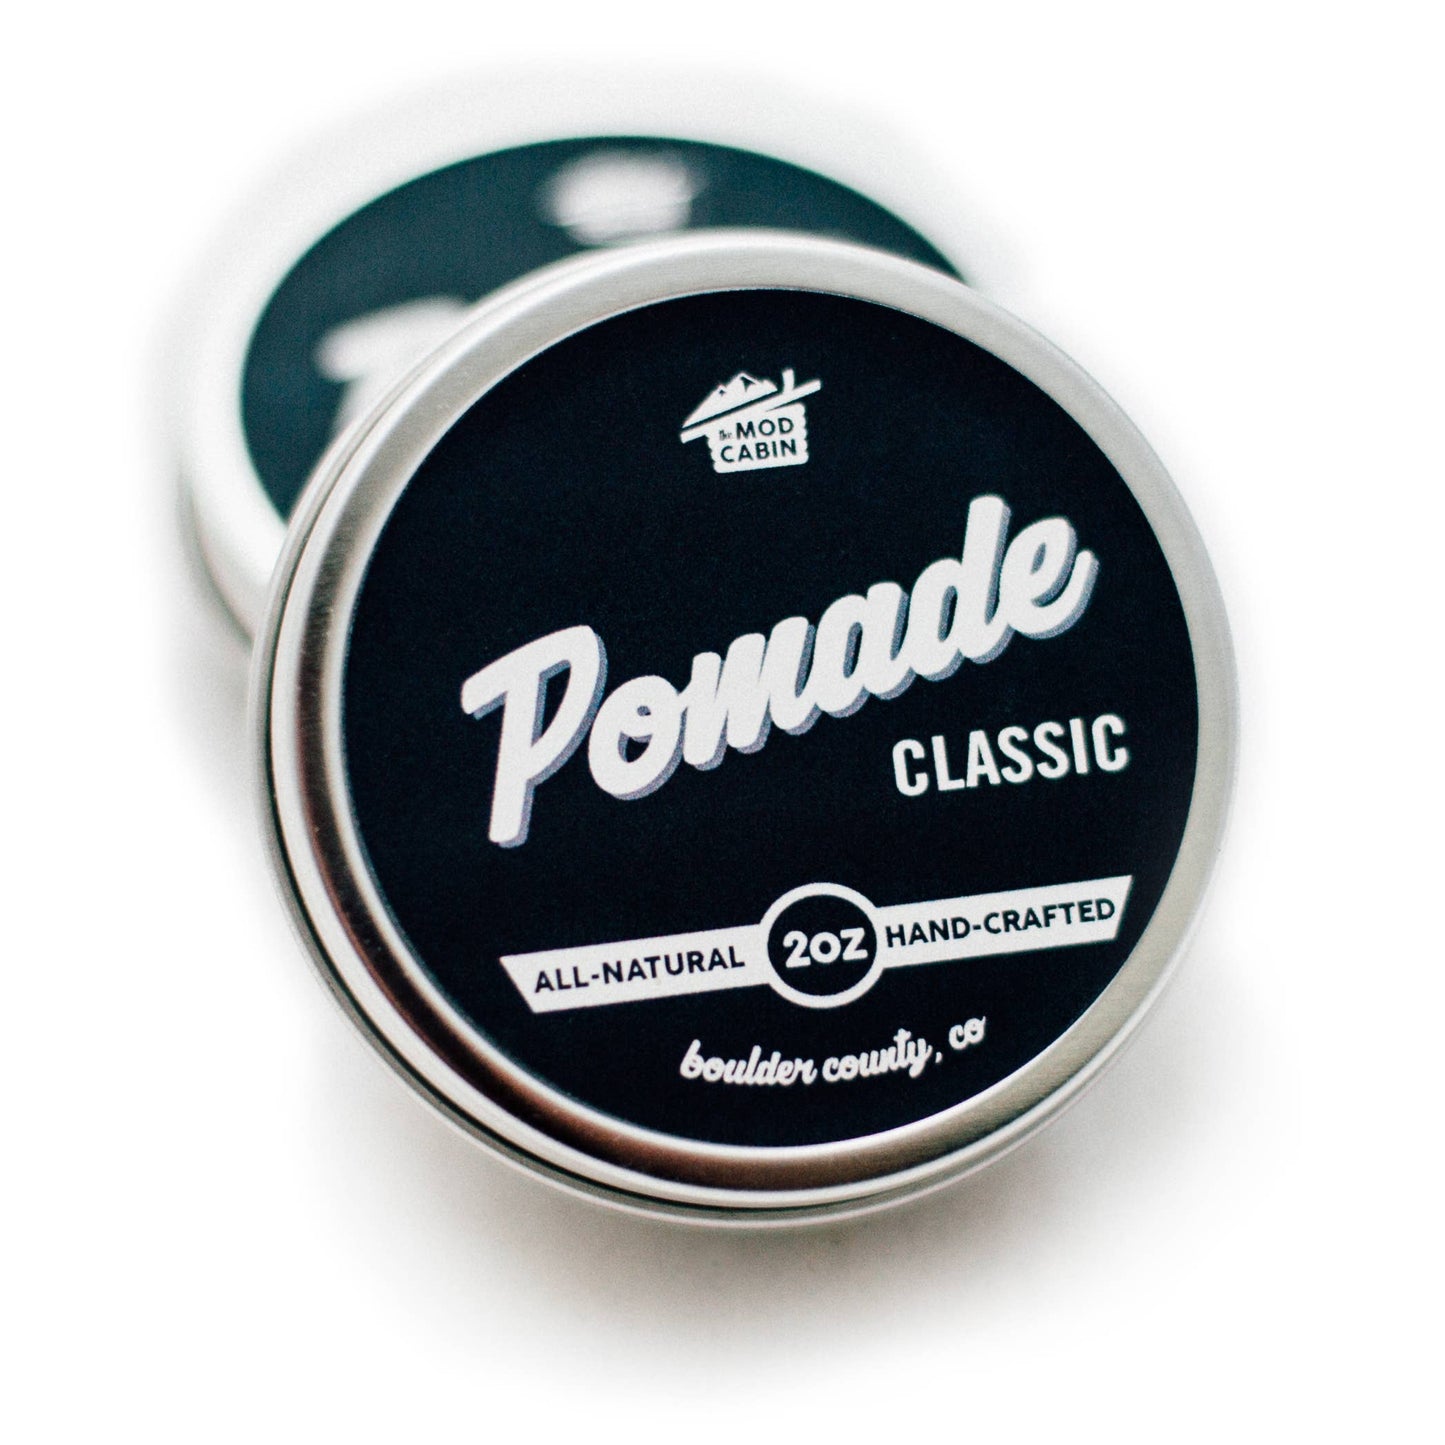 Classic Pomade by The Mod Cabin